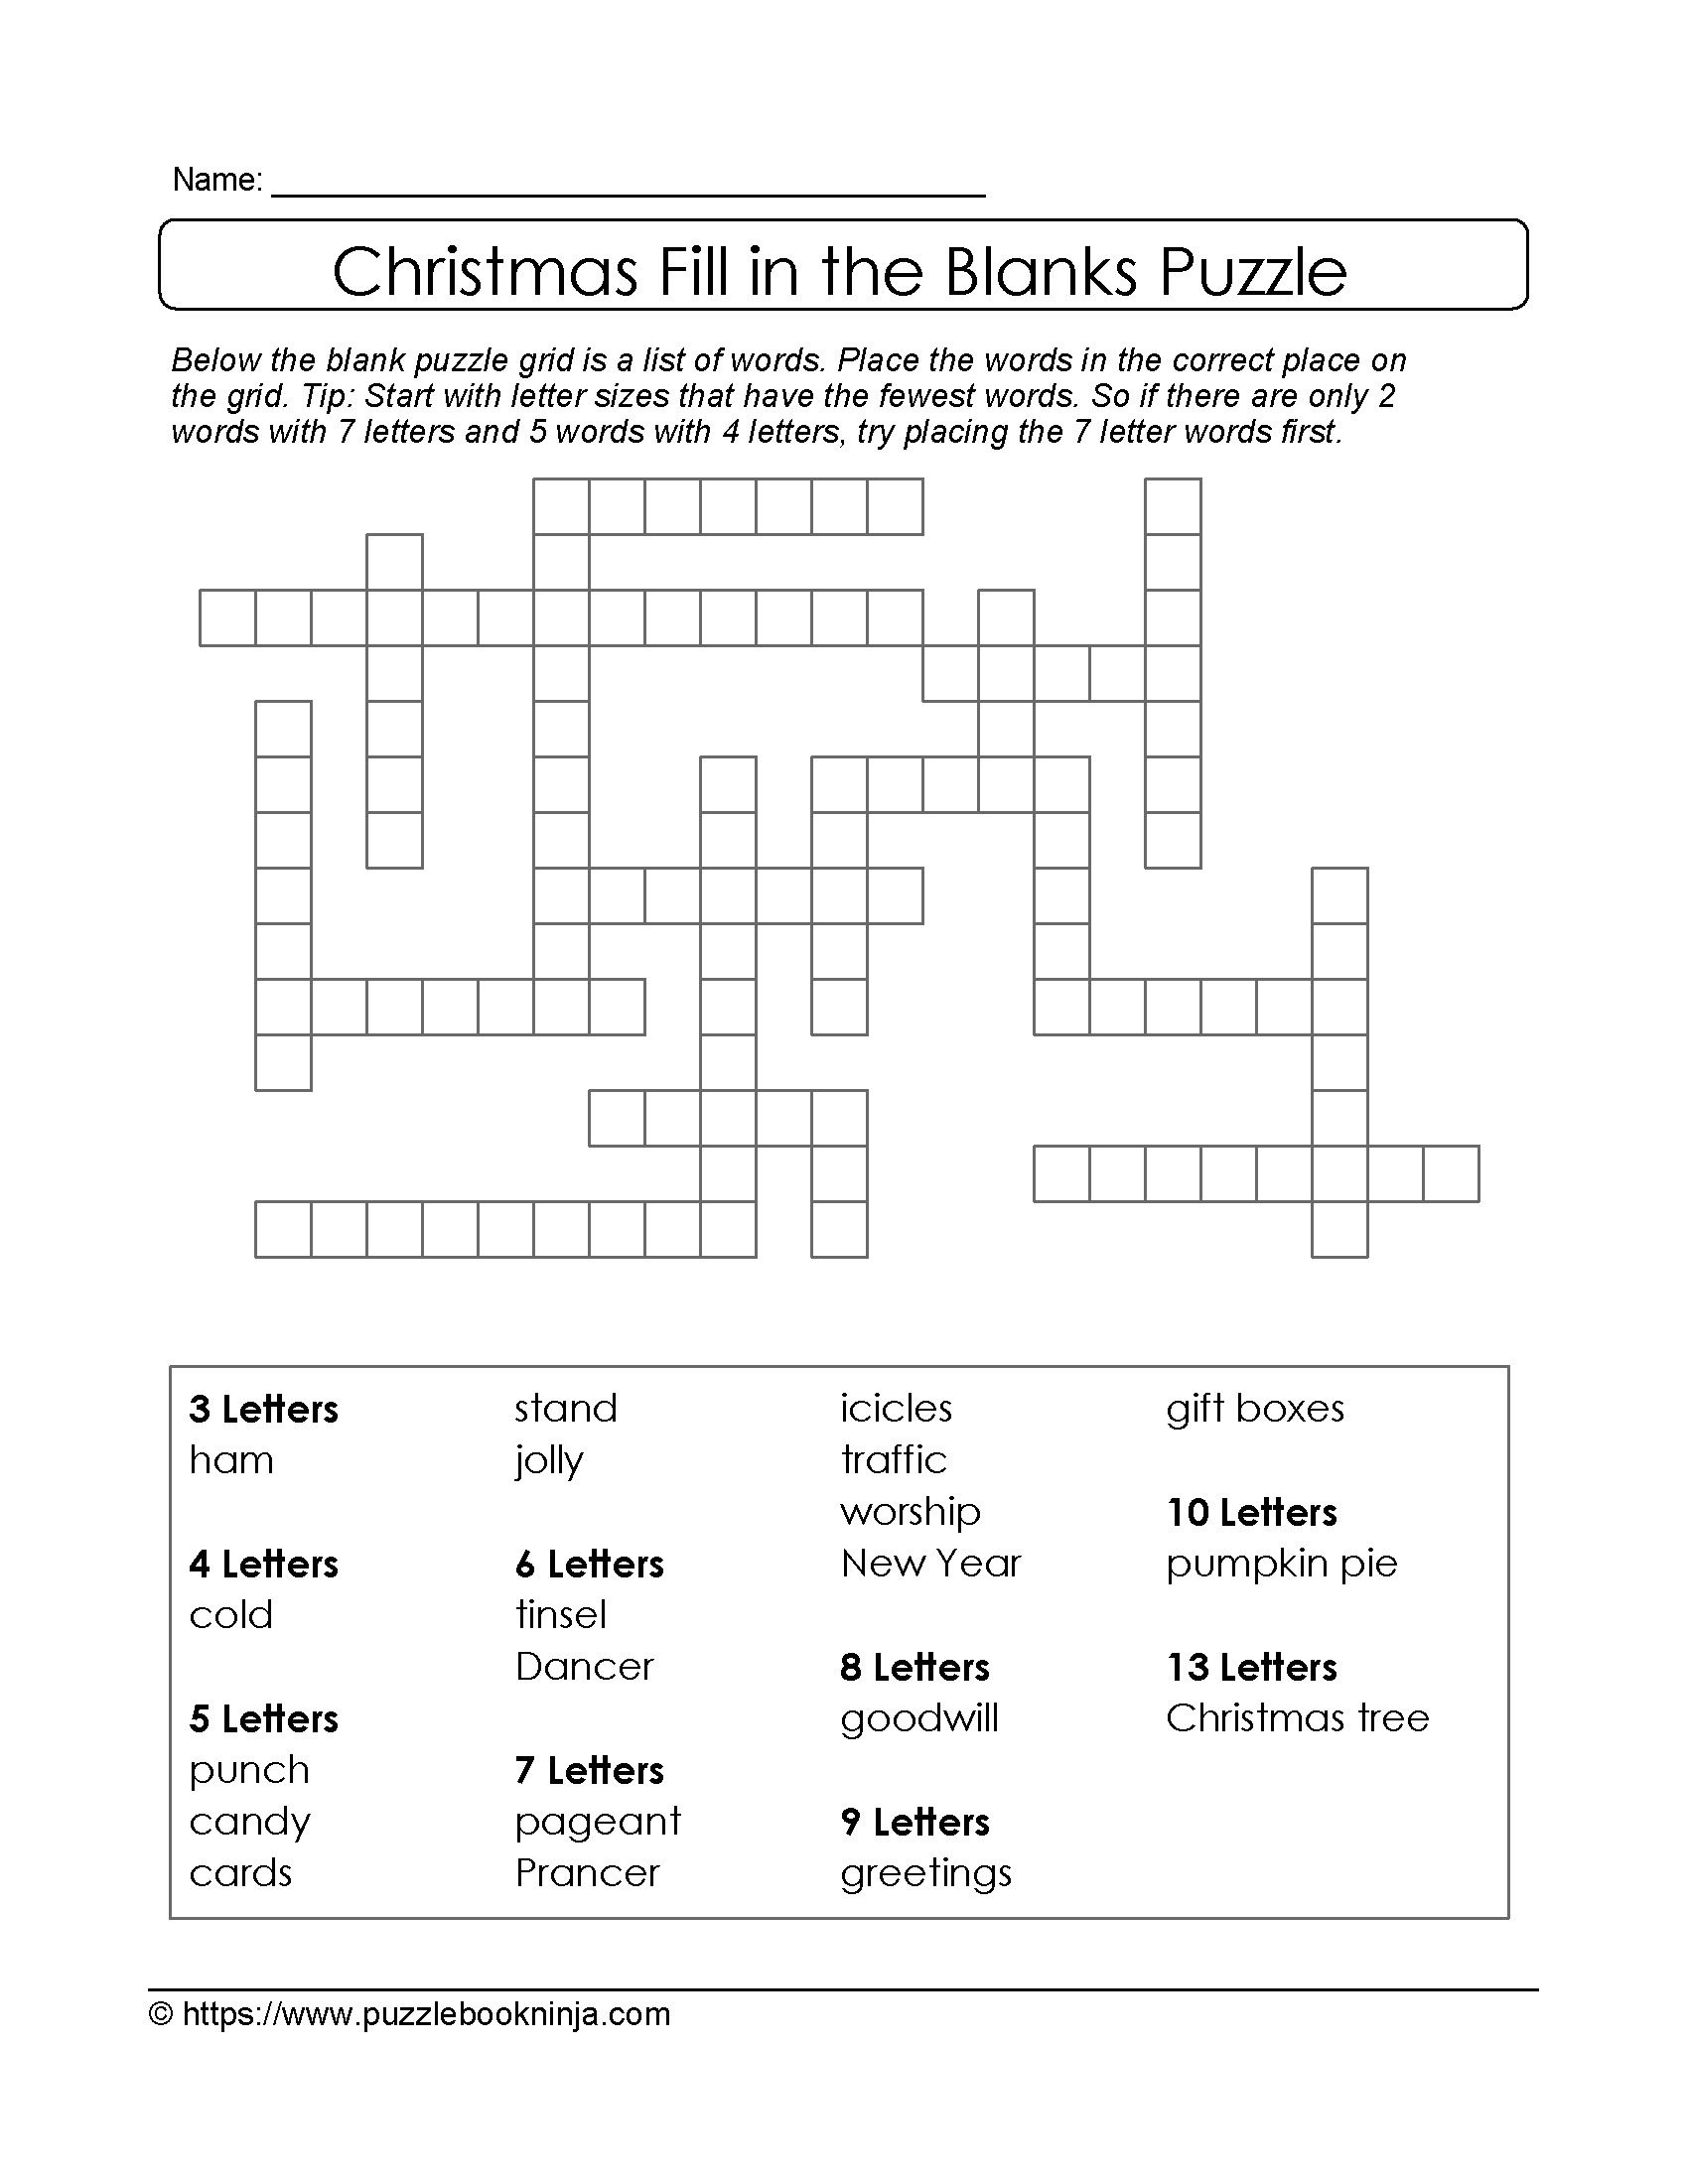 Freebie Xmas Puzzle To Print. Fill In The Blanks Crossword Like - Printable Blank Crossword Puzzle Template